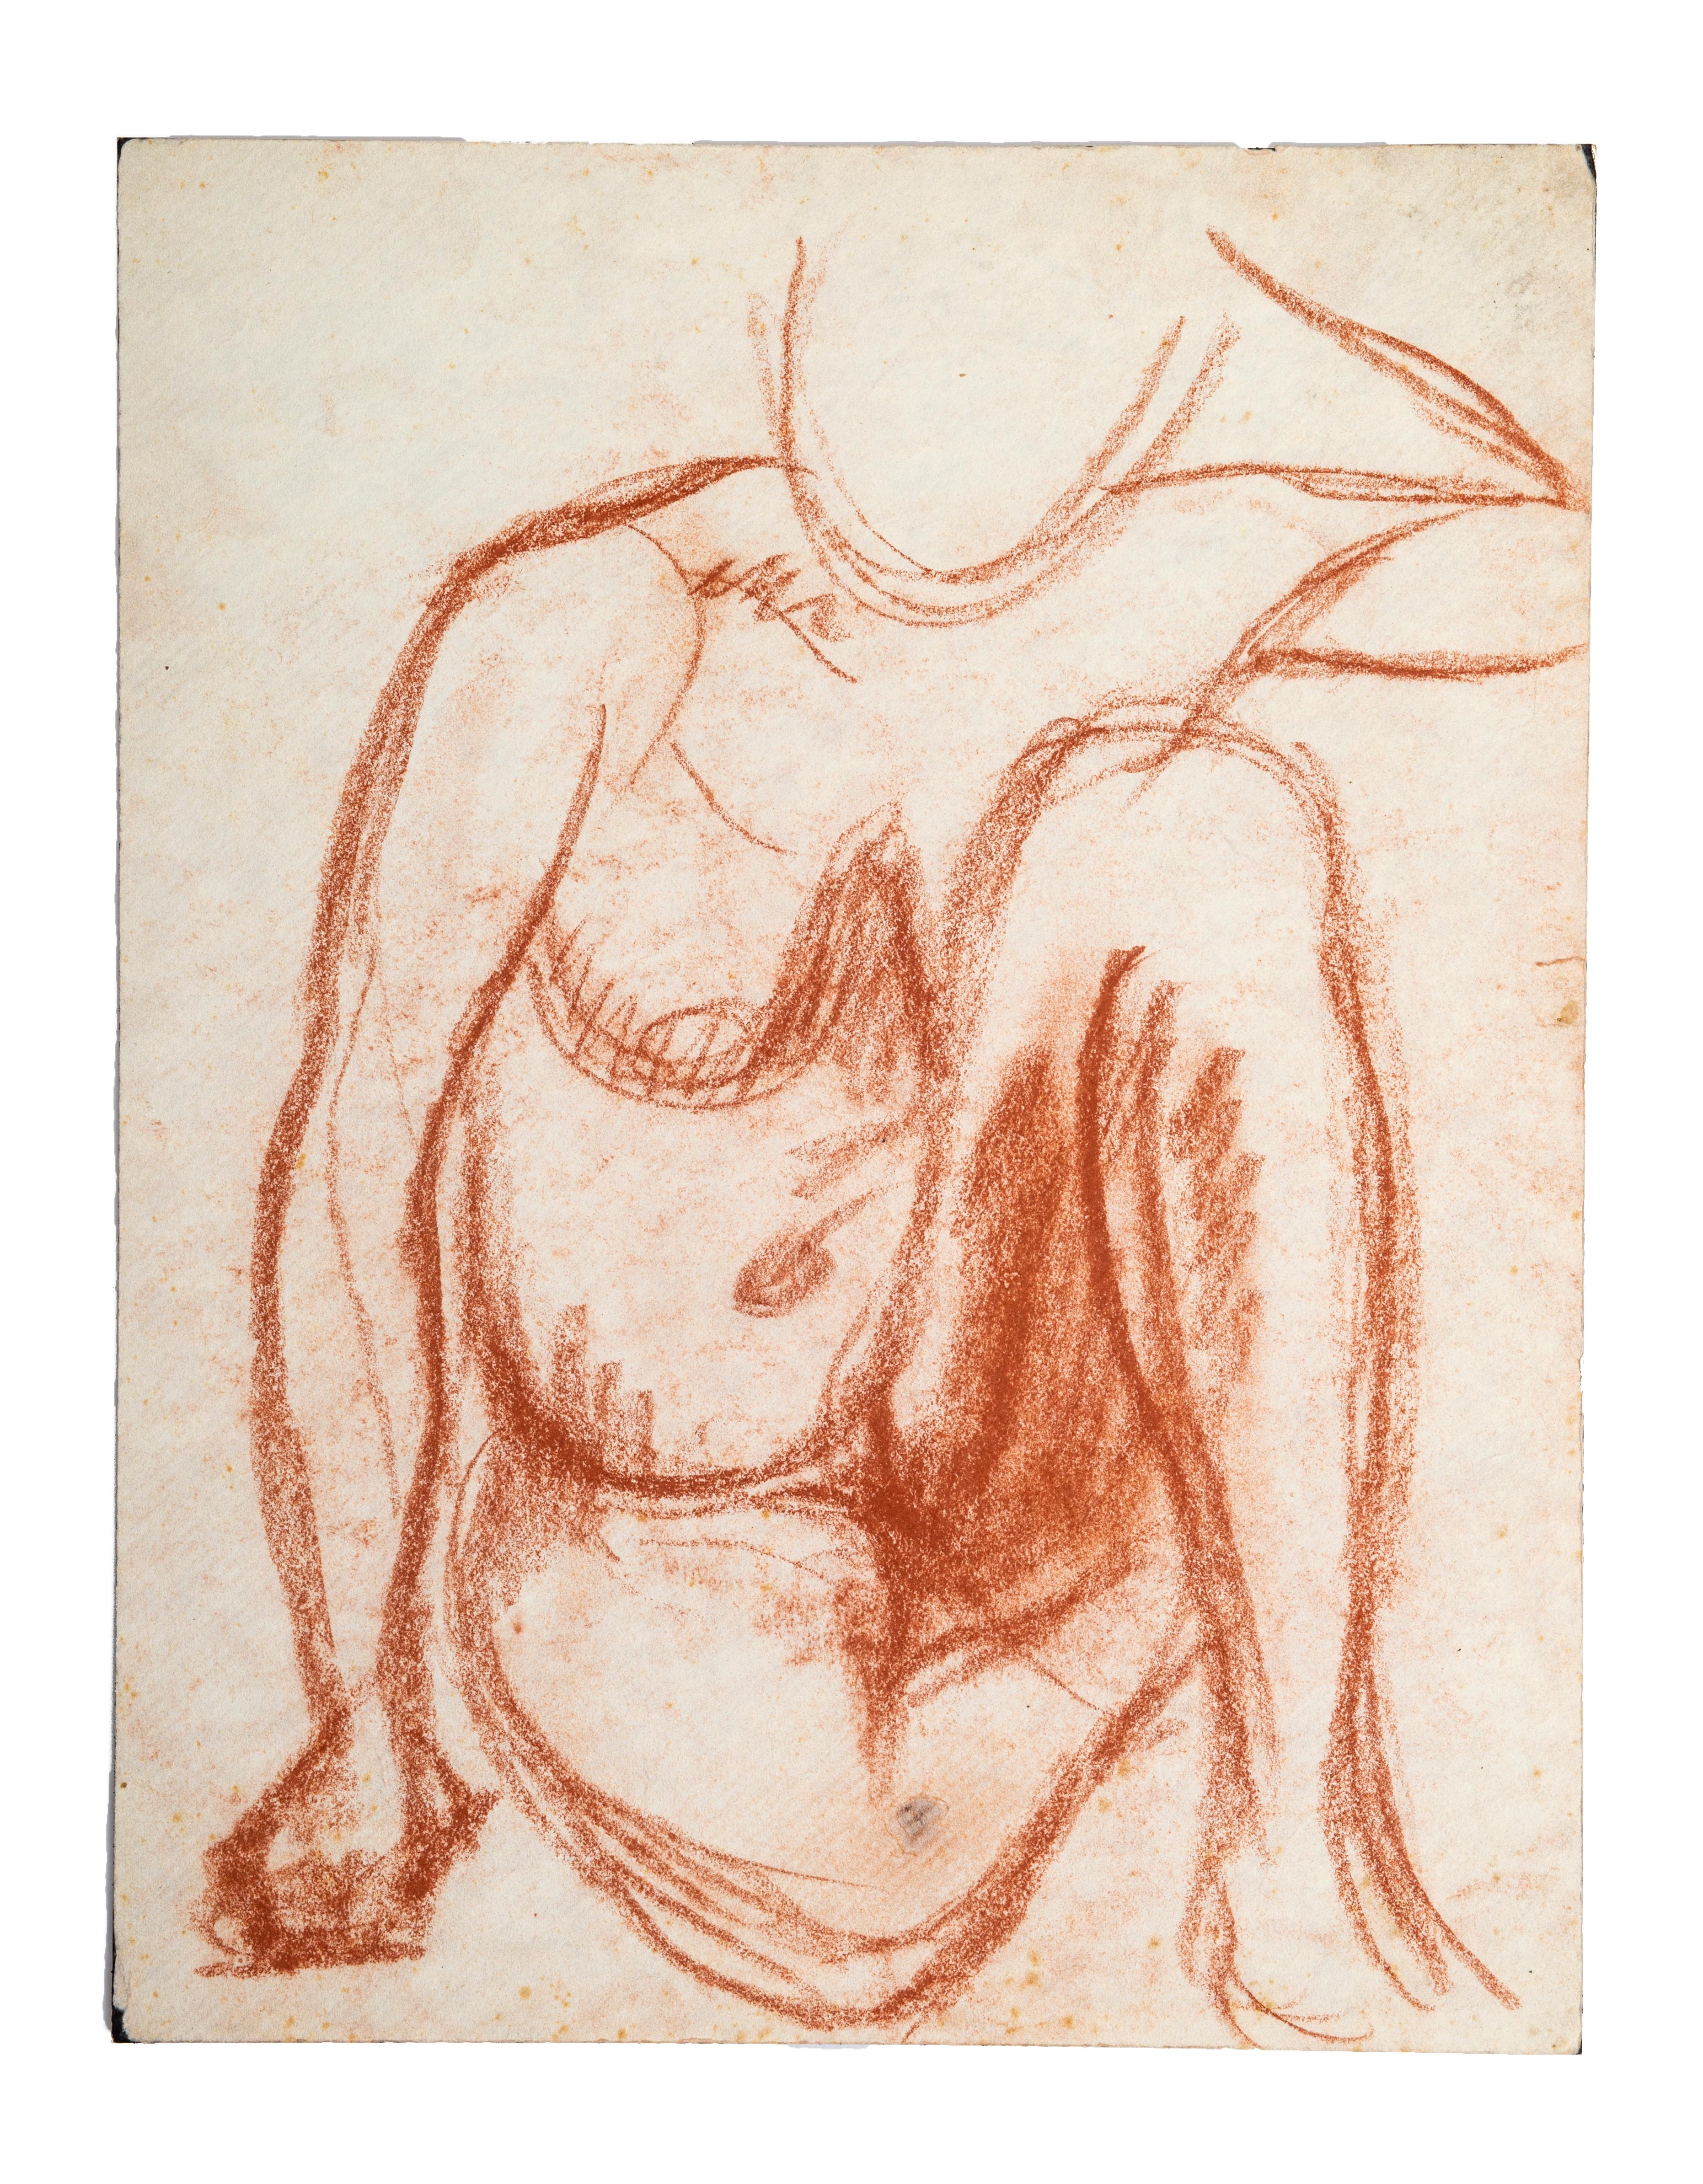 Nudes - Original Sanguine Drawing by French Master Early 20th Century - Art by Unknown